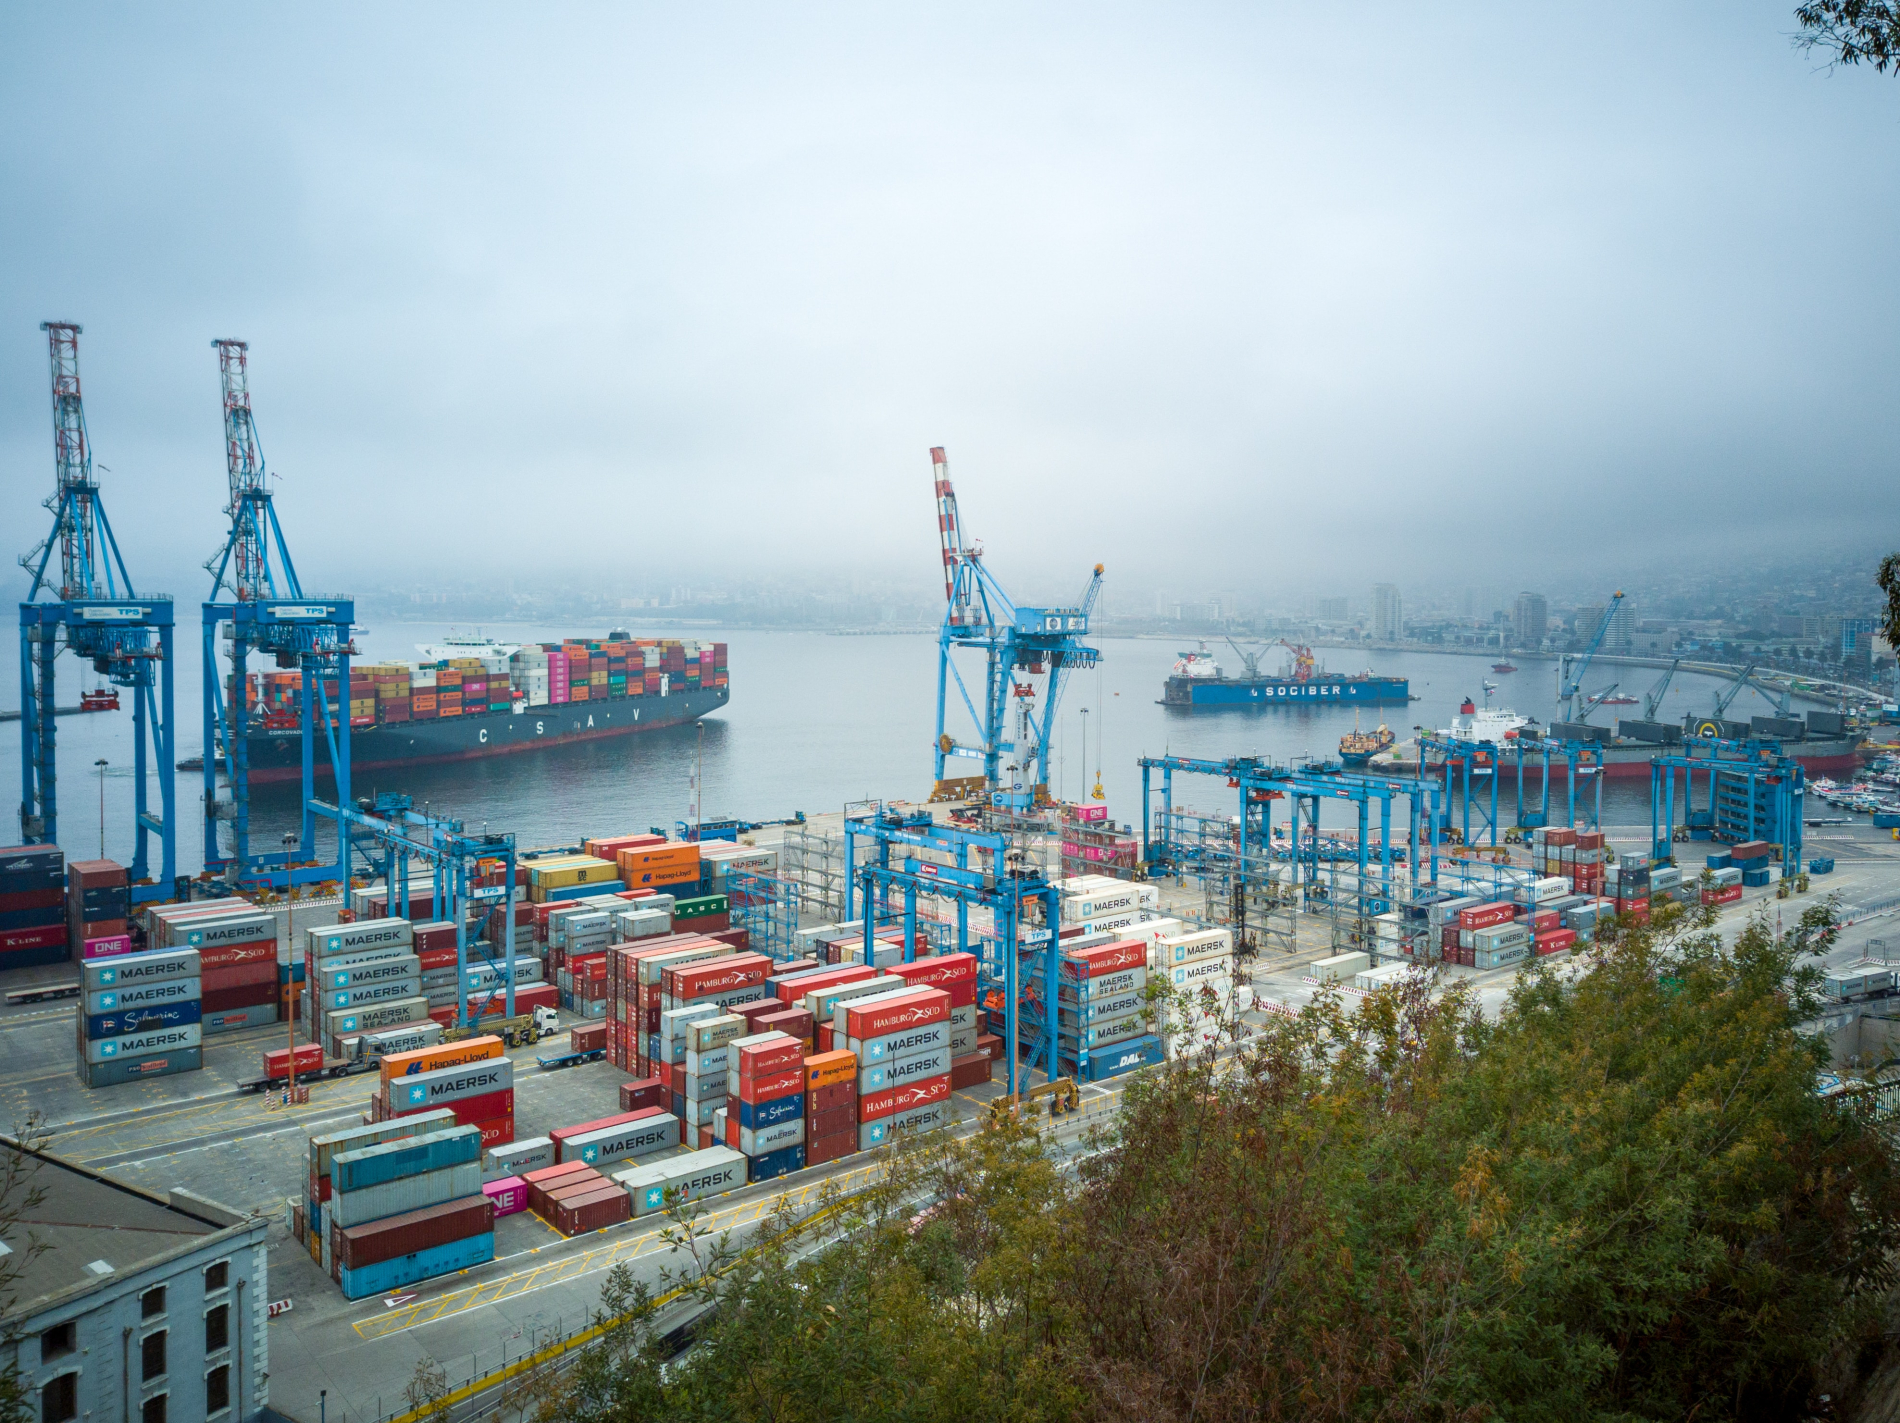 An busy urban port with many containers and container ships in the background